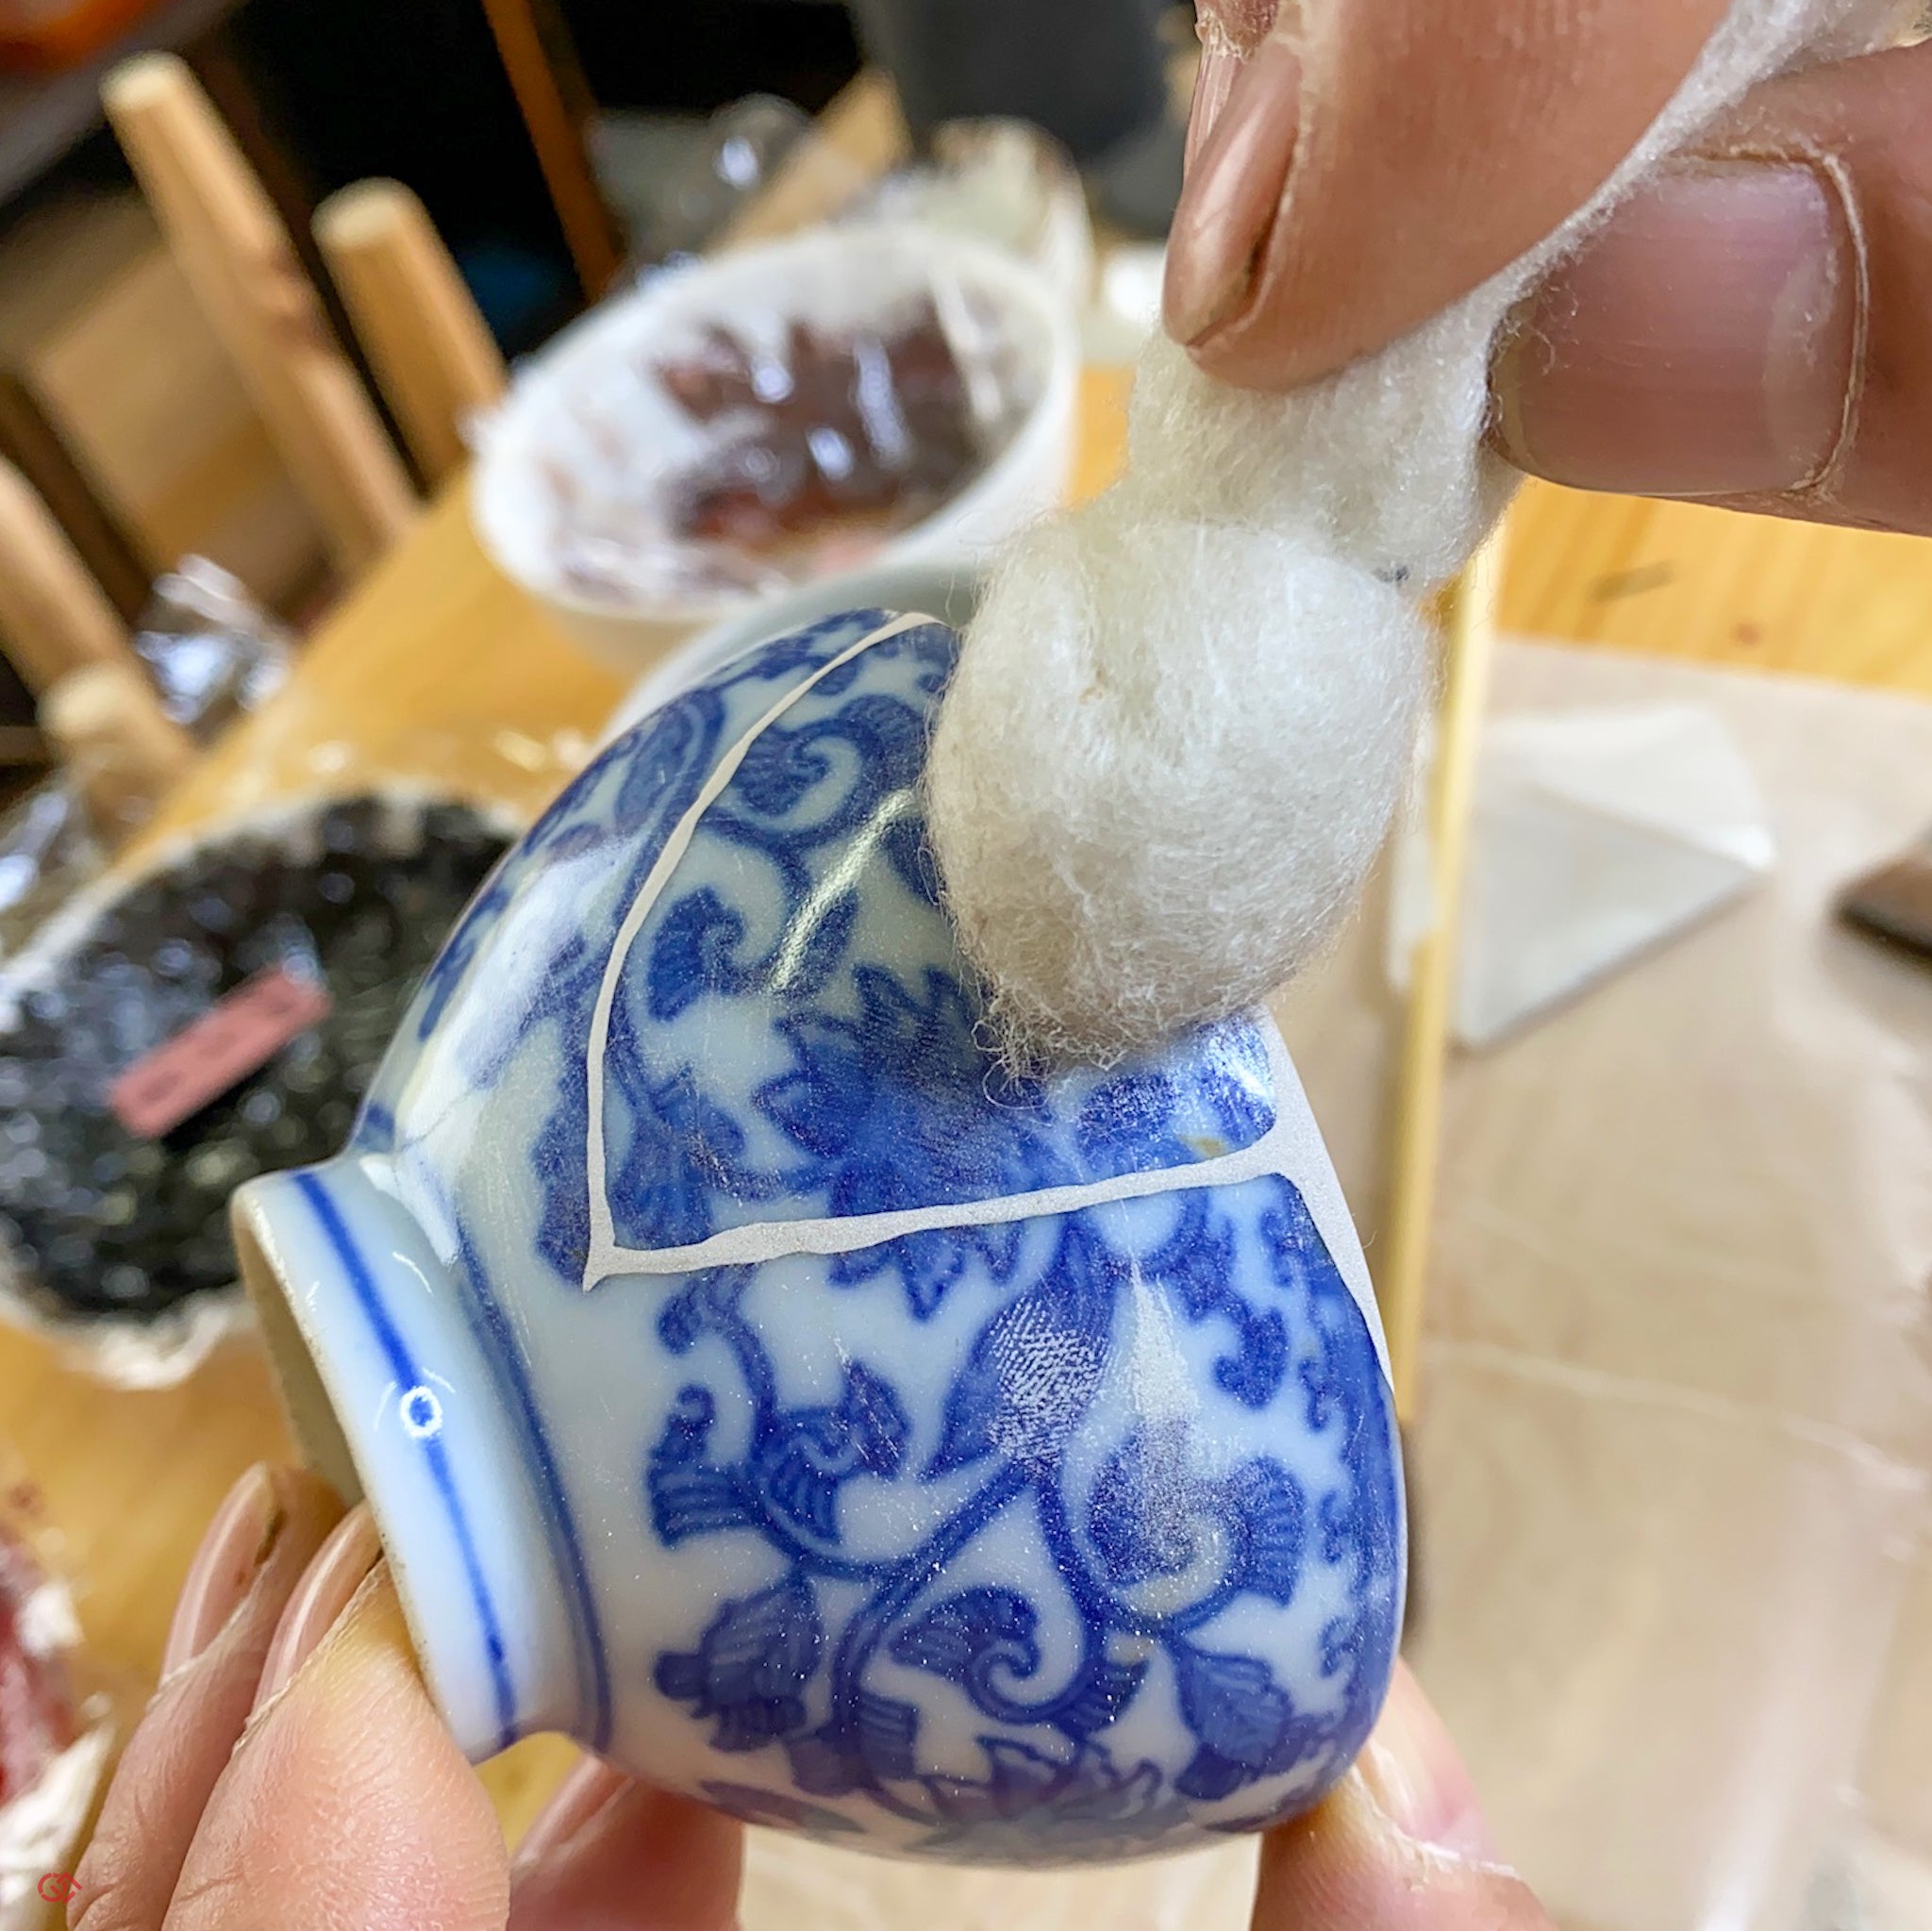 Repair by authentic Japanese Kintsugi